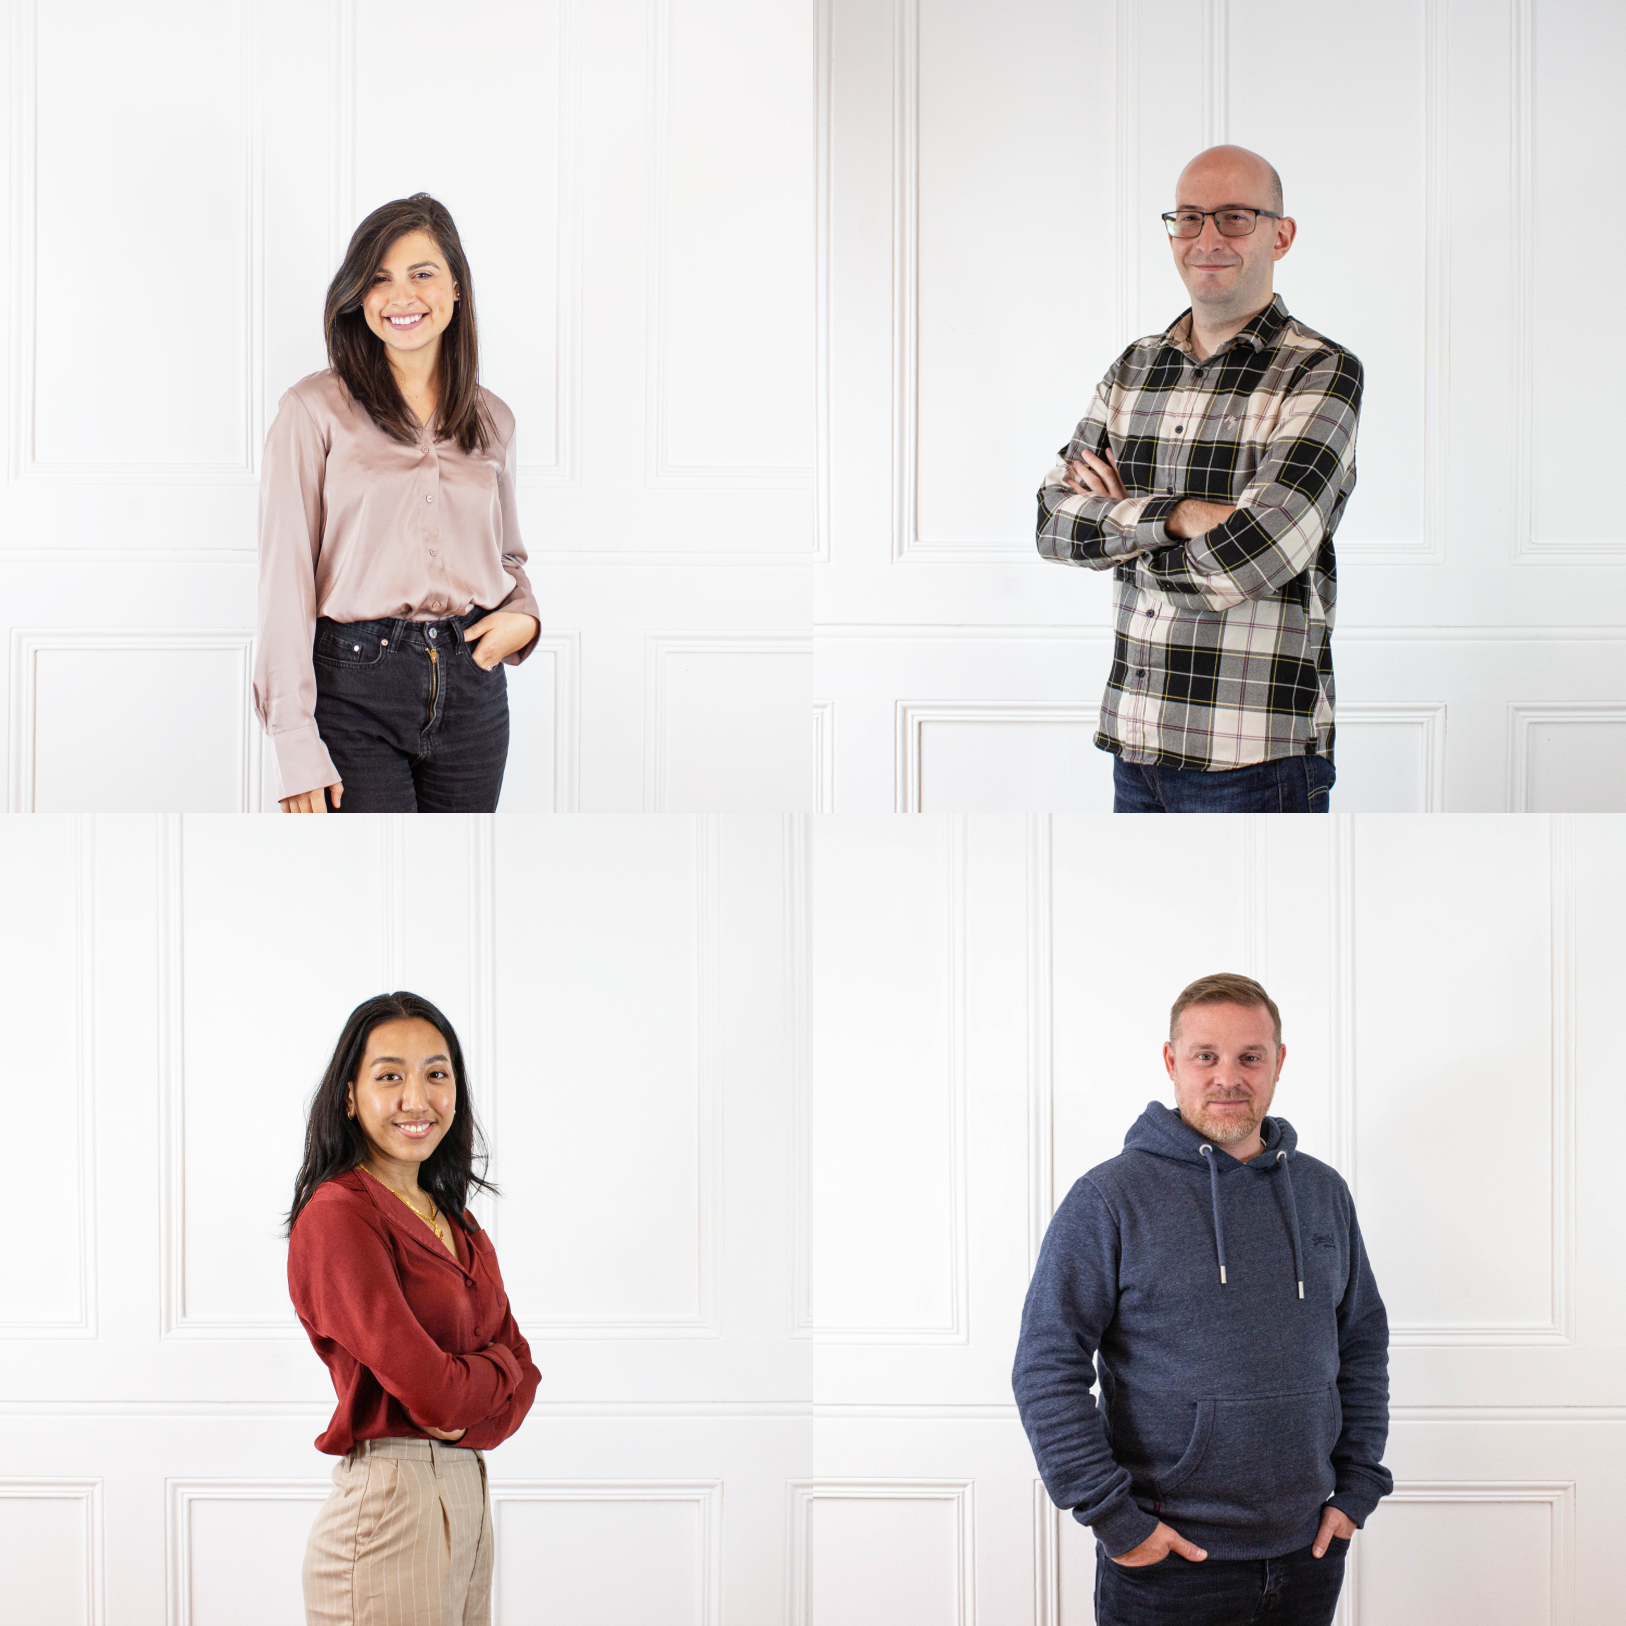 Fifty Five and Five newcomers Sarah Schrum, William Sale, Pranita Tamang and Mike Hulse